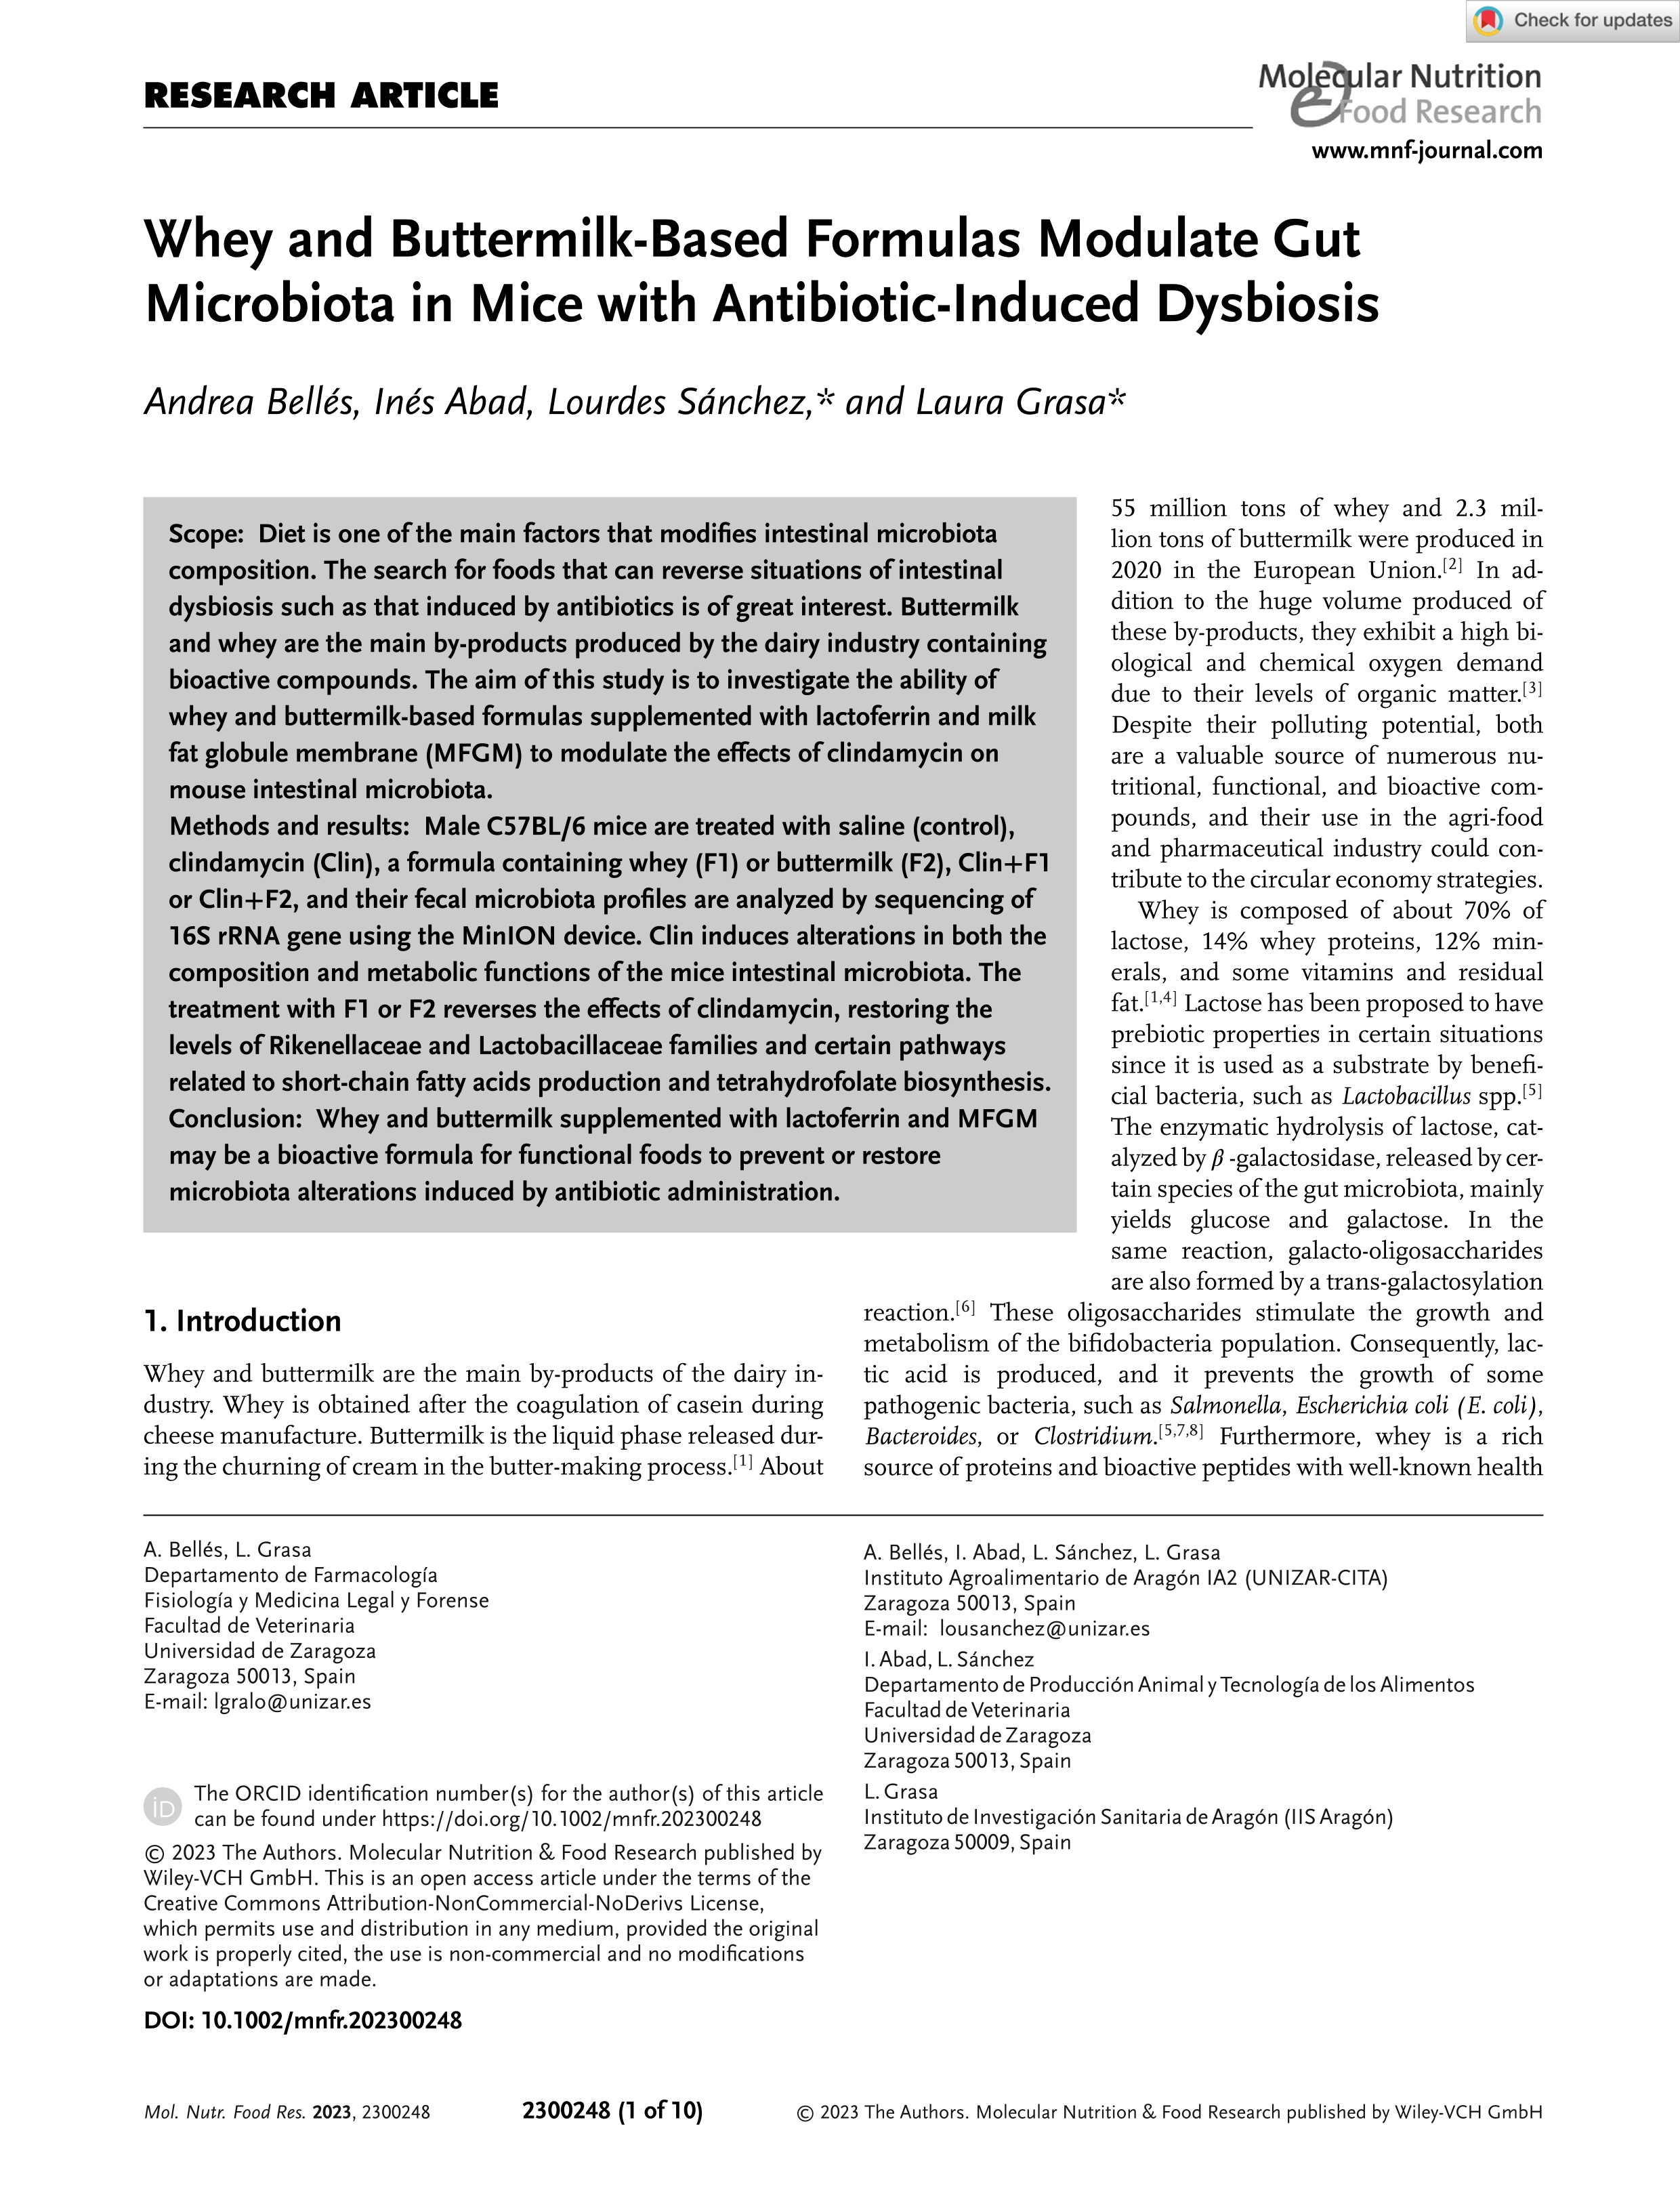 Whey and Buttermilk-Based Formulas Modulate Gut Microbiota in Mice with Antibiotic-Induced Dysbiosis